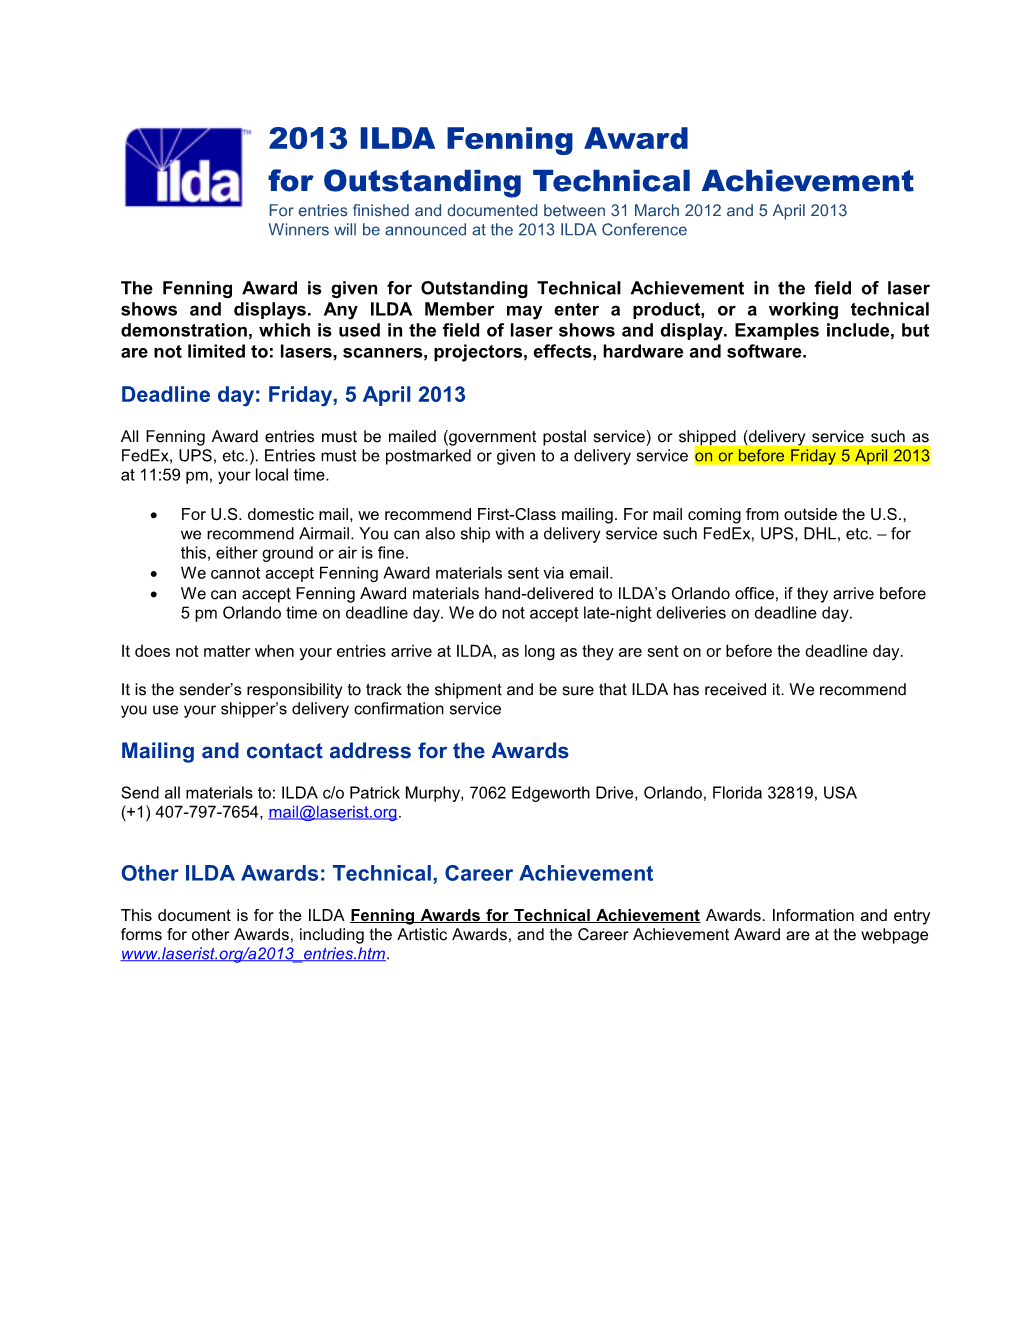 ILDA Tech Awards - Rules and Entry Form